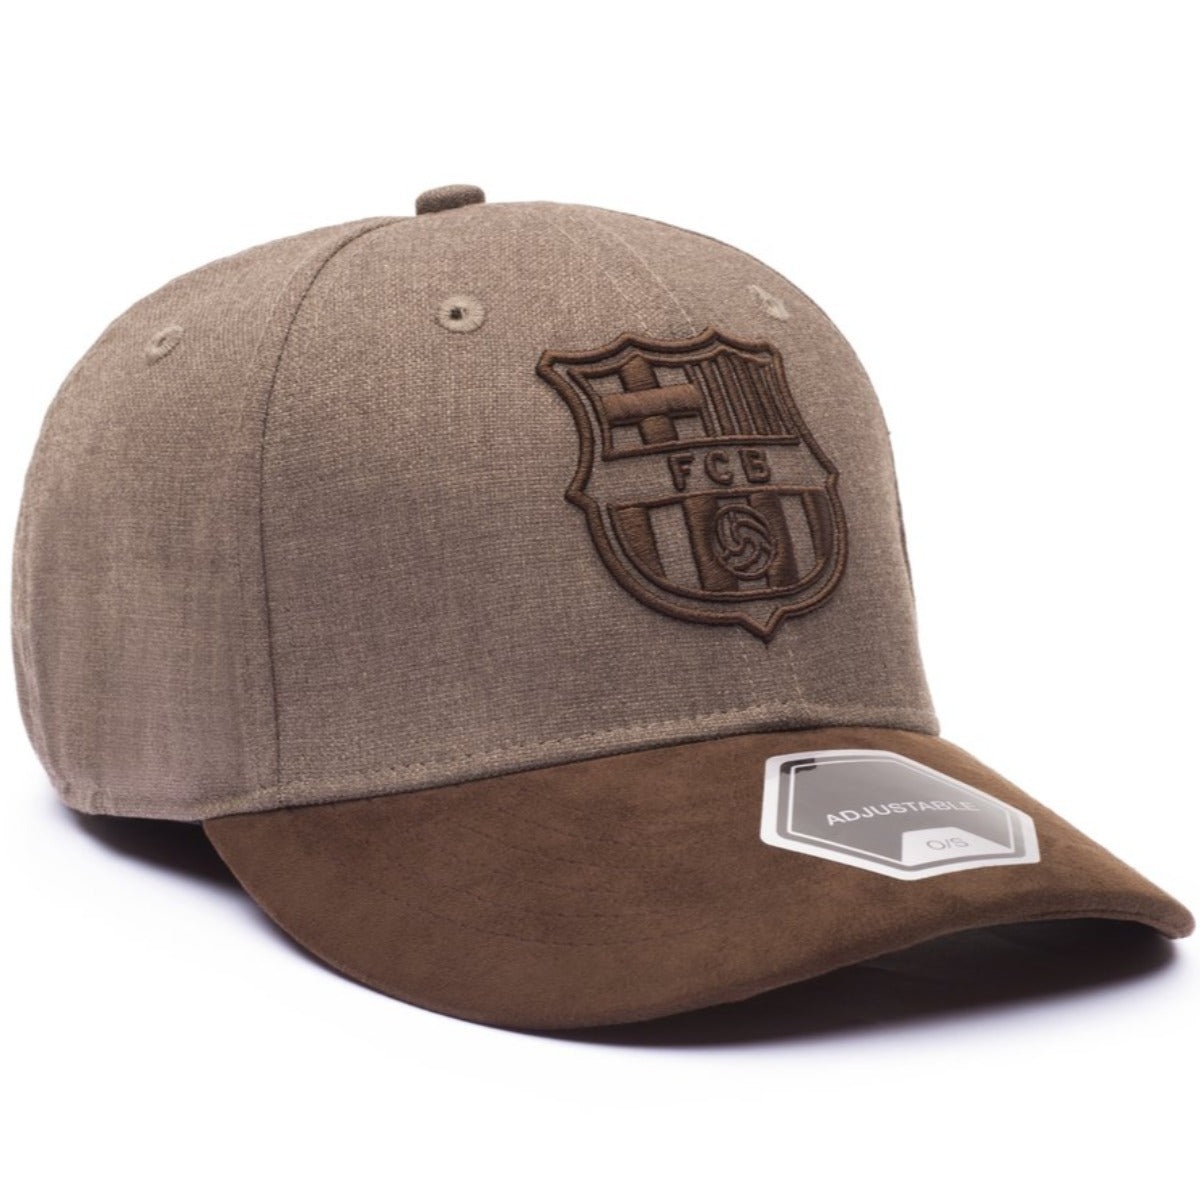 FI COLLECTIONS FC BARCELONA CAPITANO ADJUSTABLE HAT